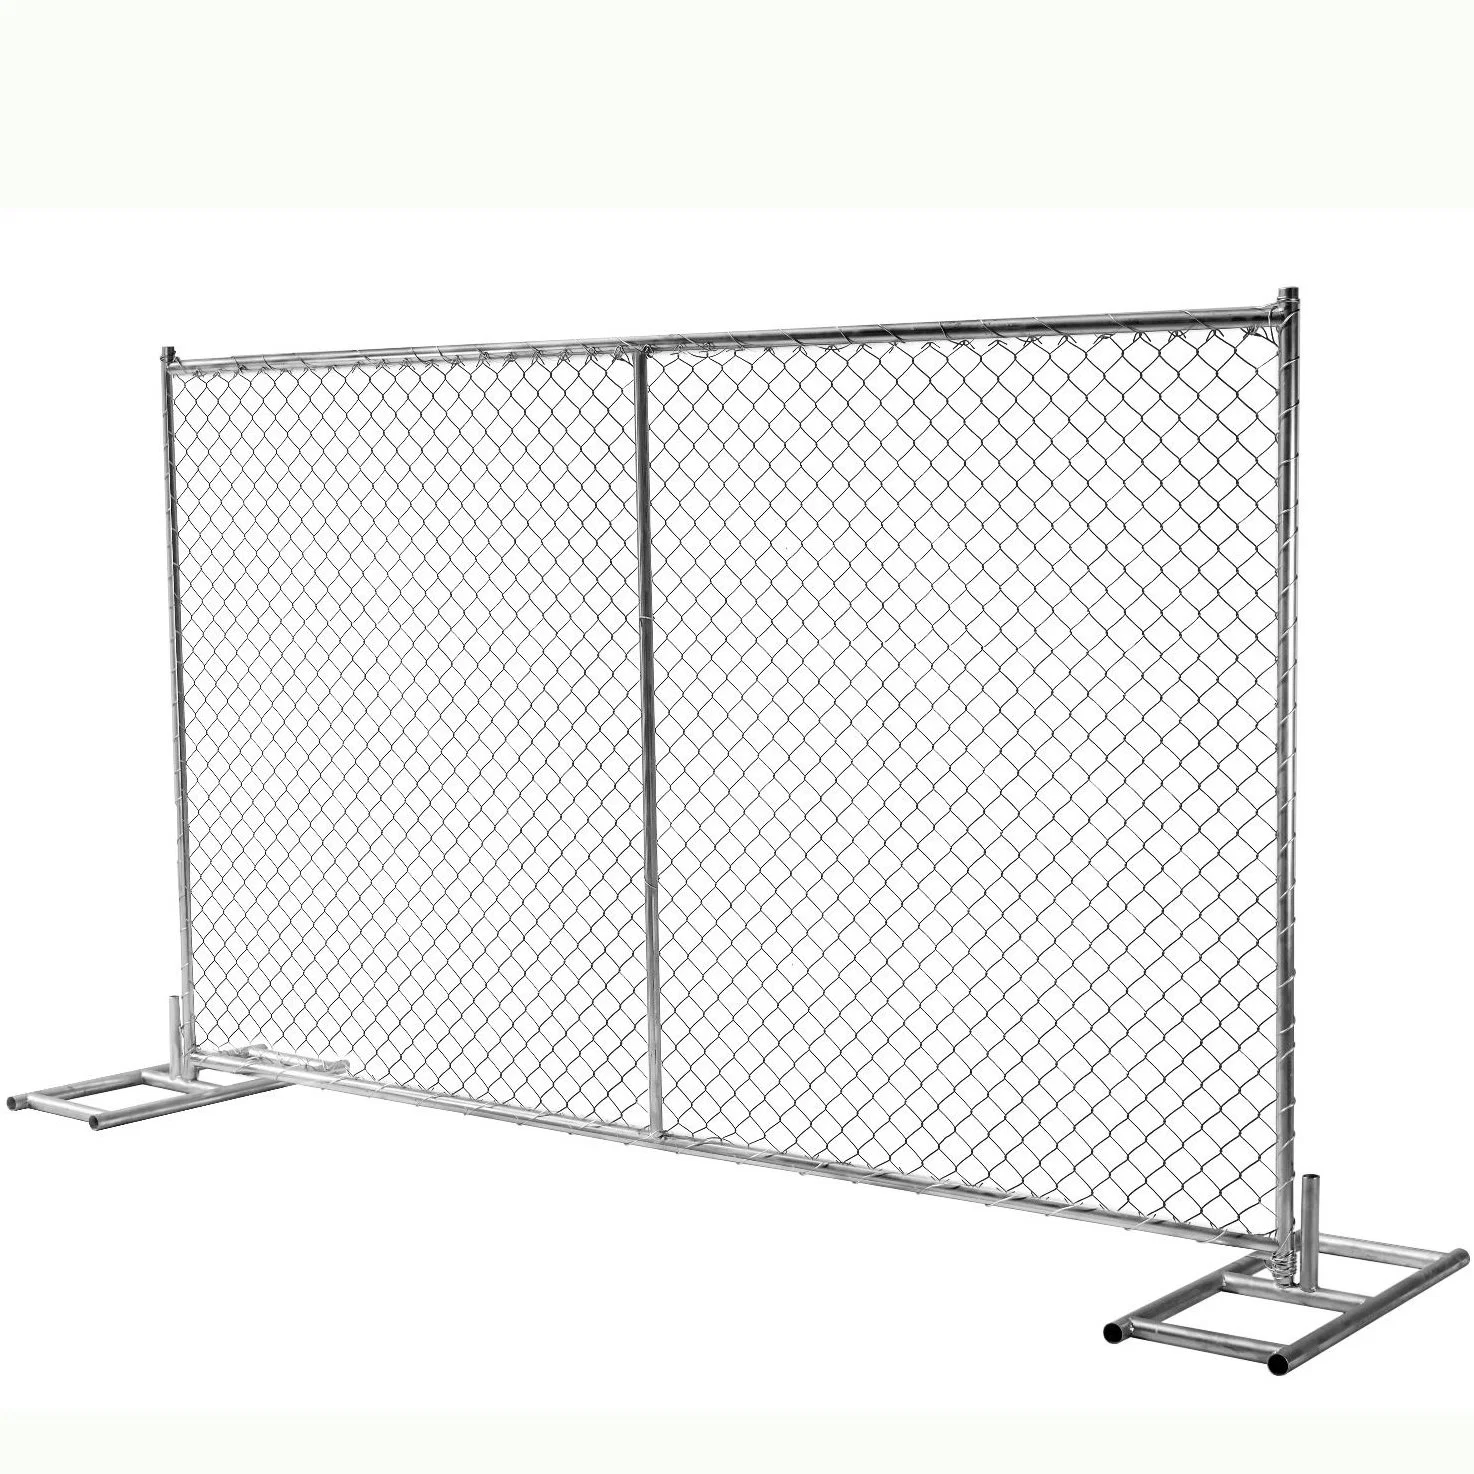 America Design Steel Wire Mesh Temporary Chain Link Garden Security Fence